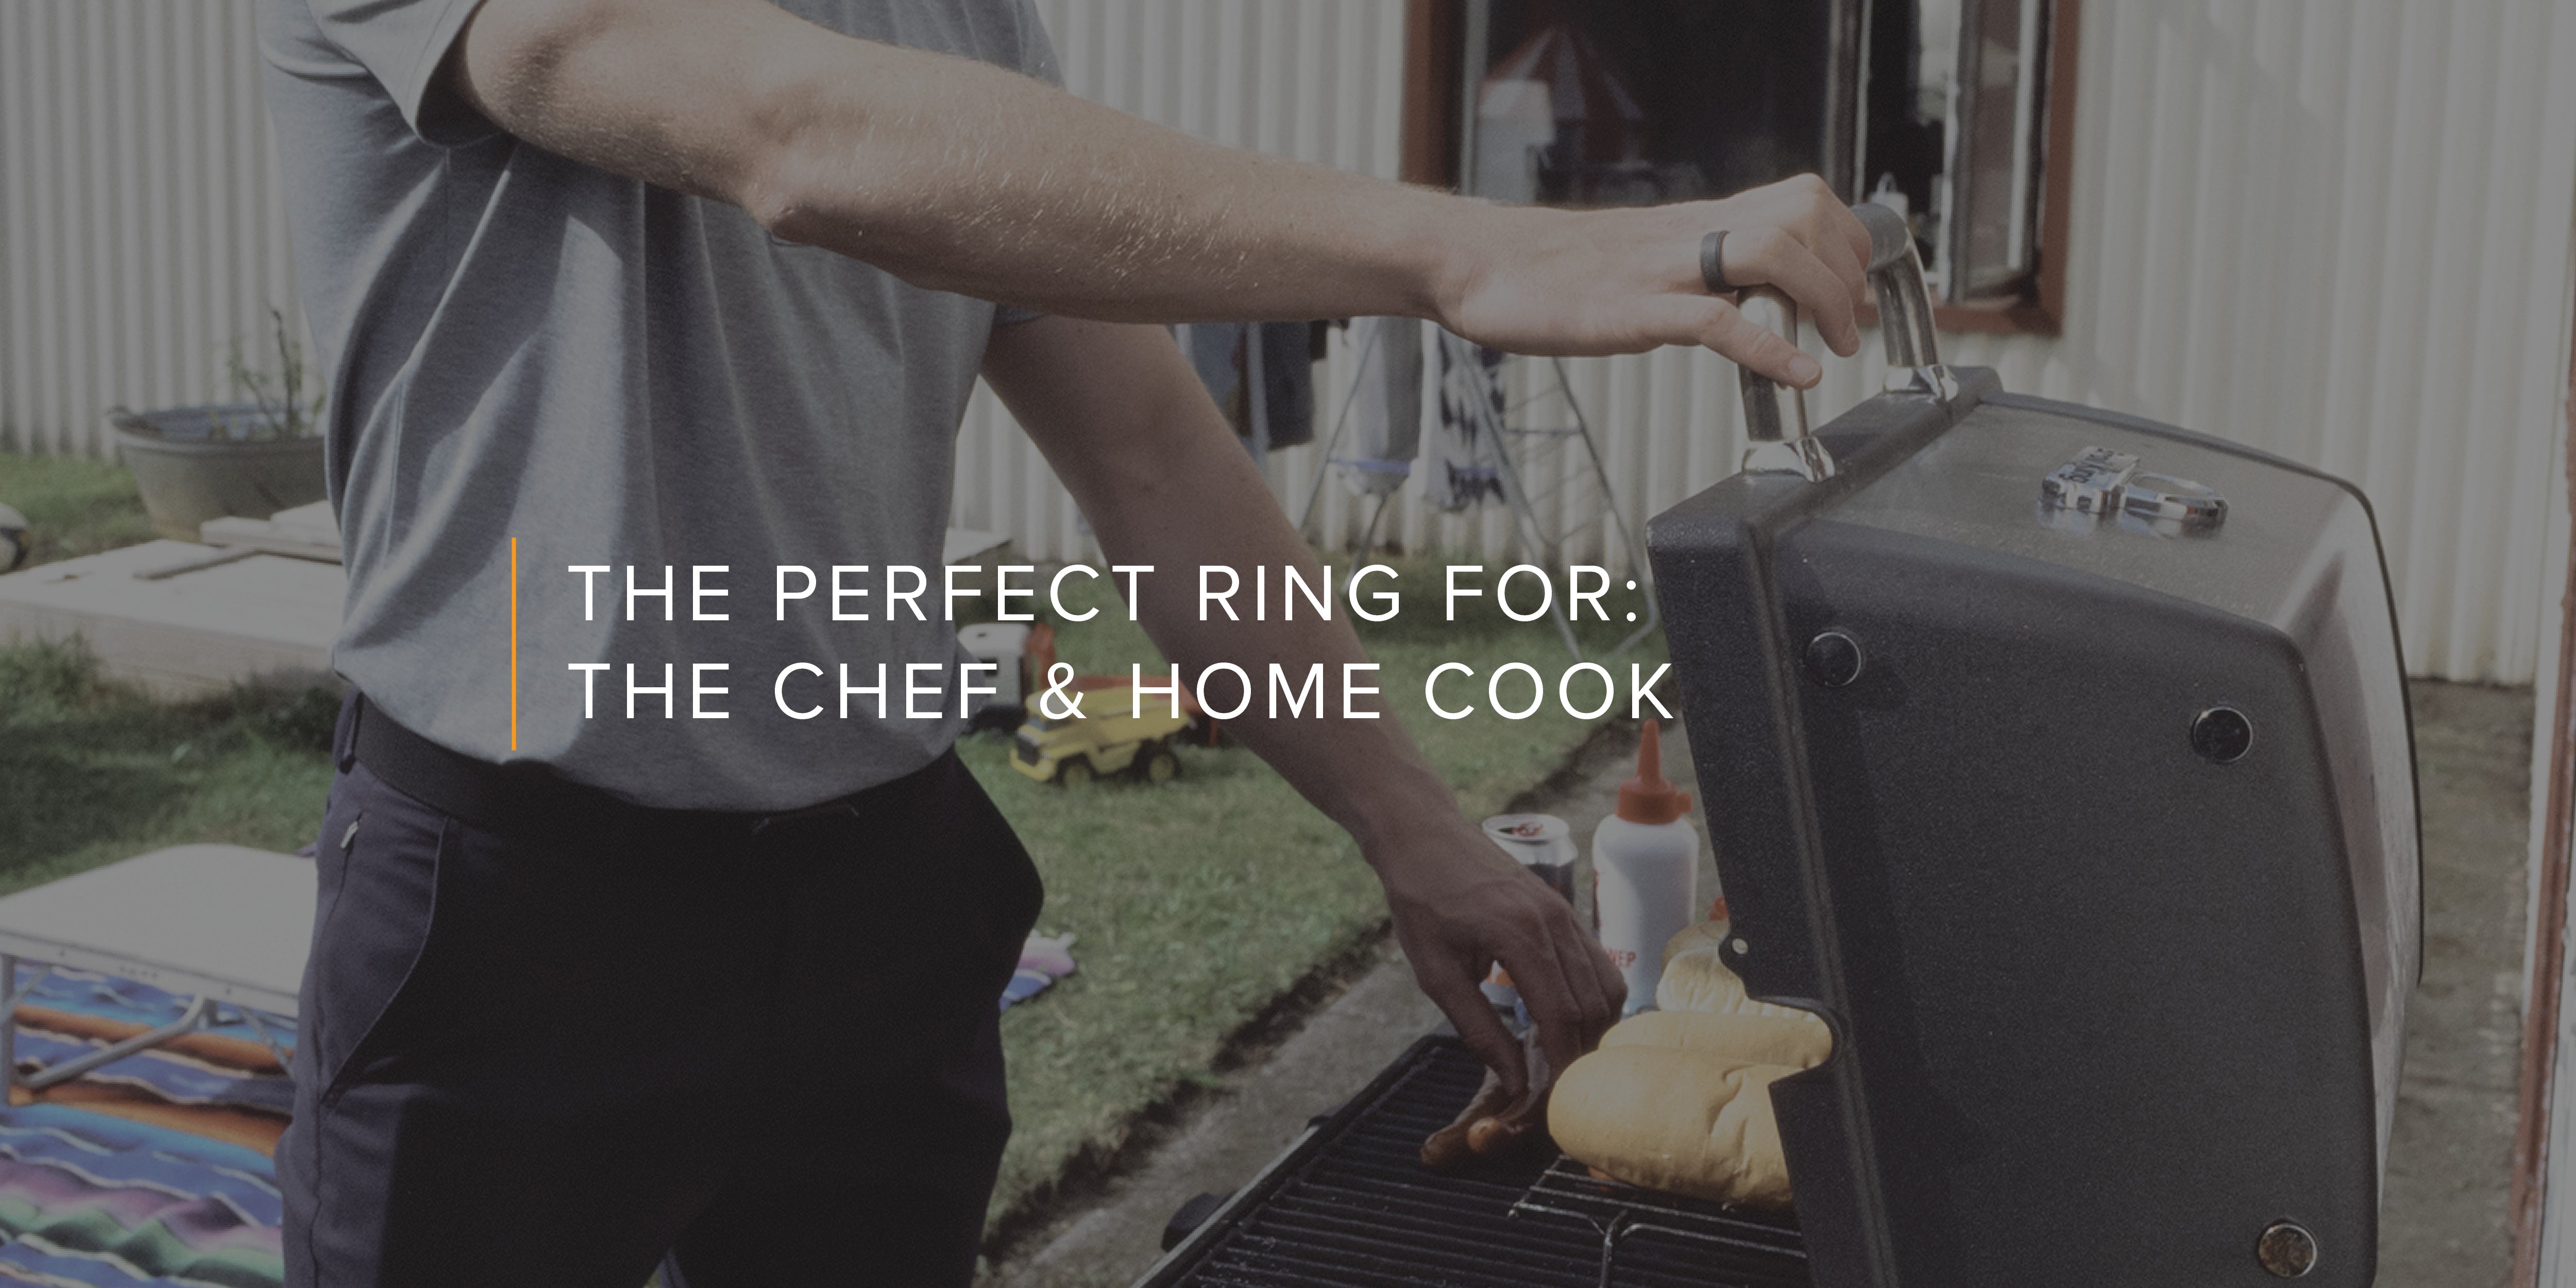 The Perfect Ring For: The Chef & Home Cook